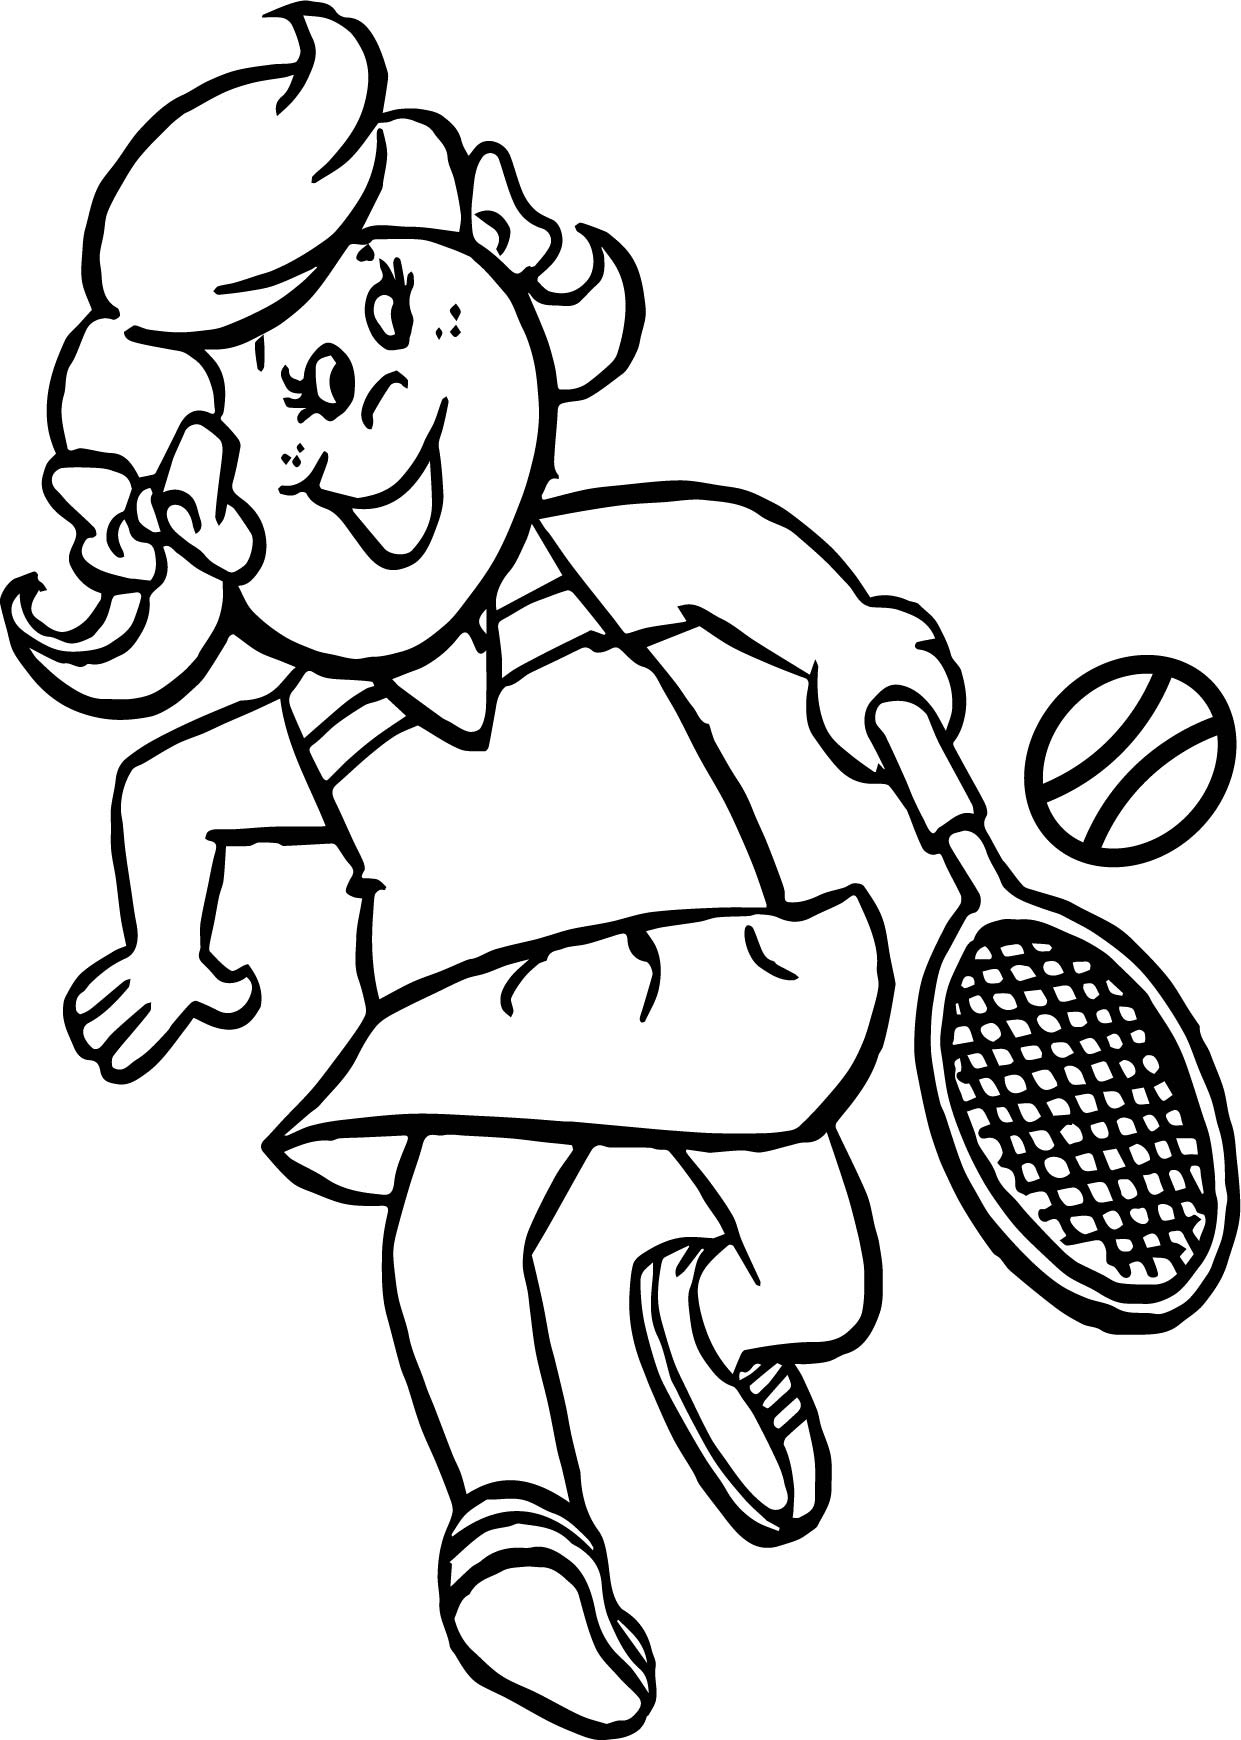 Girl Playing Tennis Coloring Page